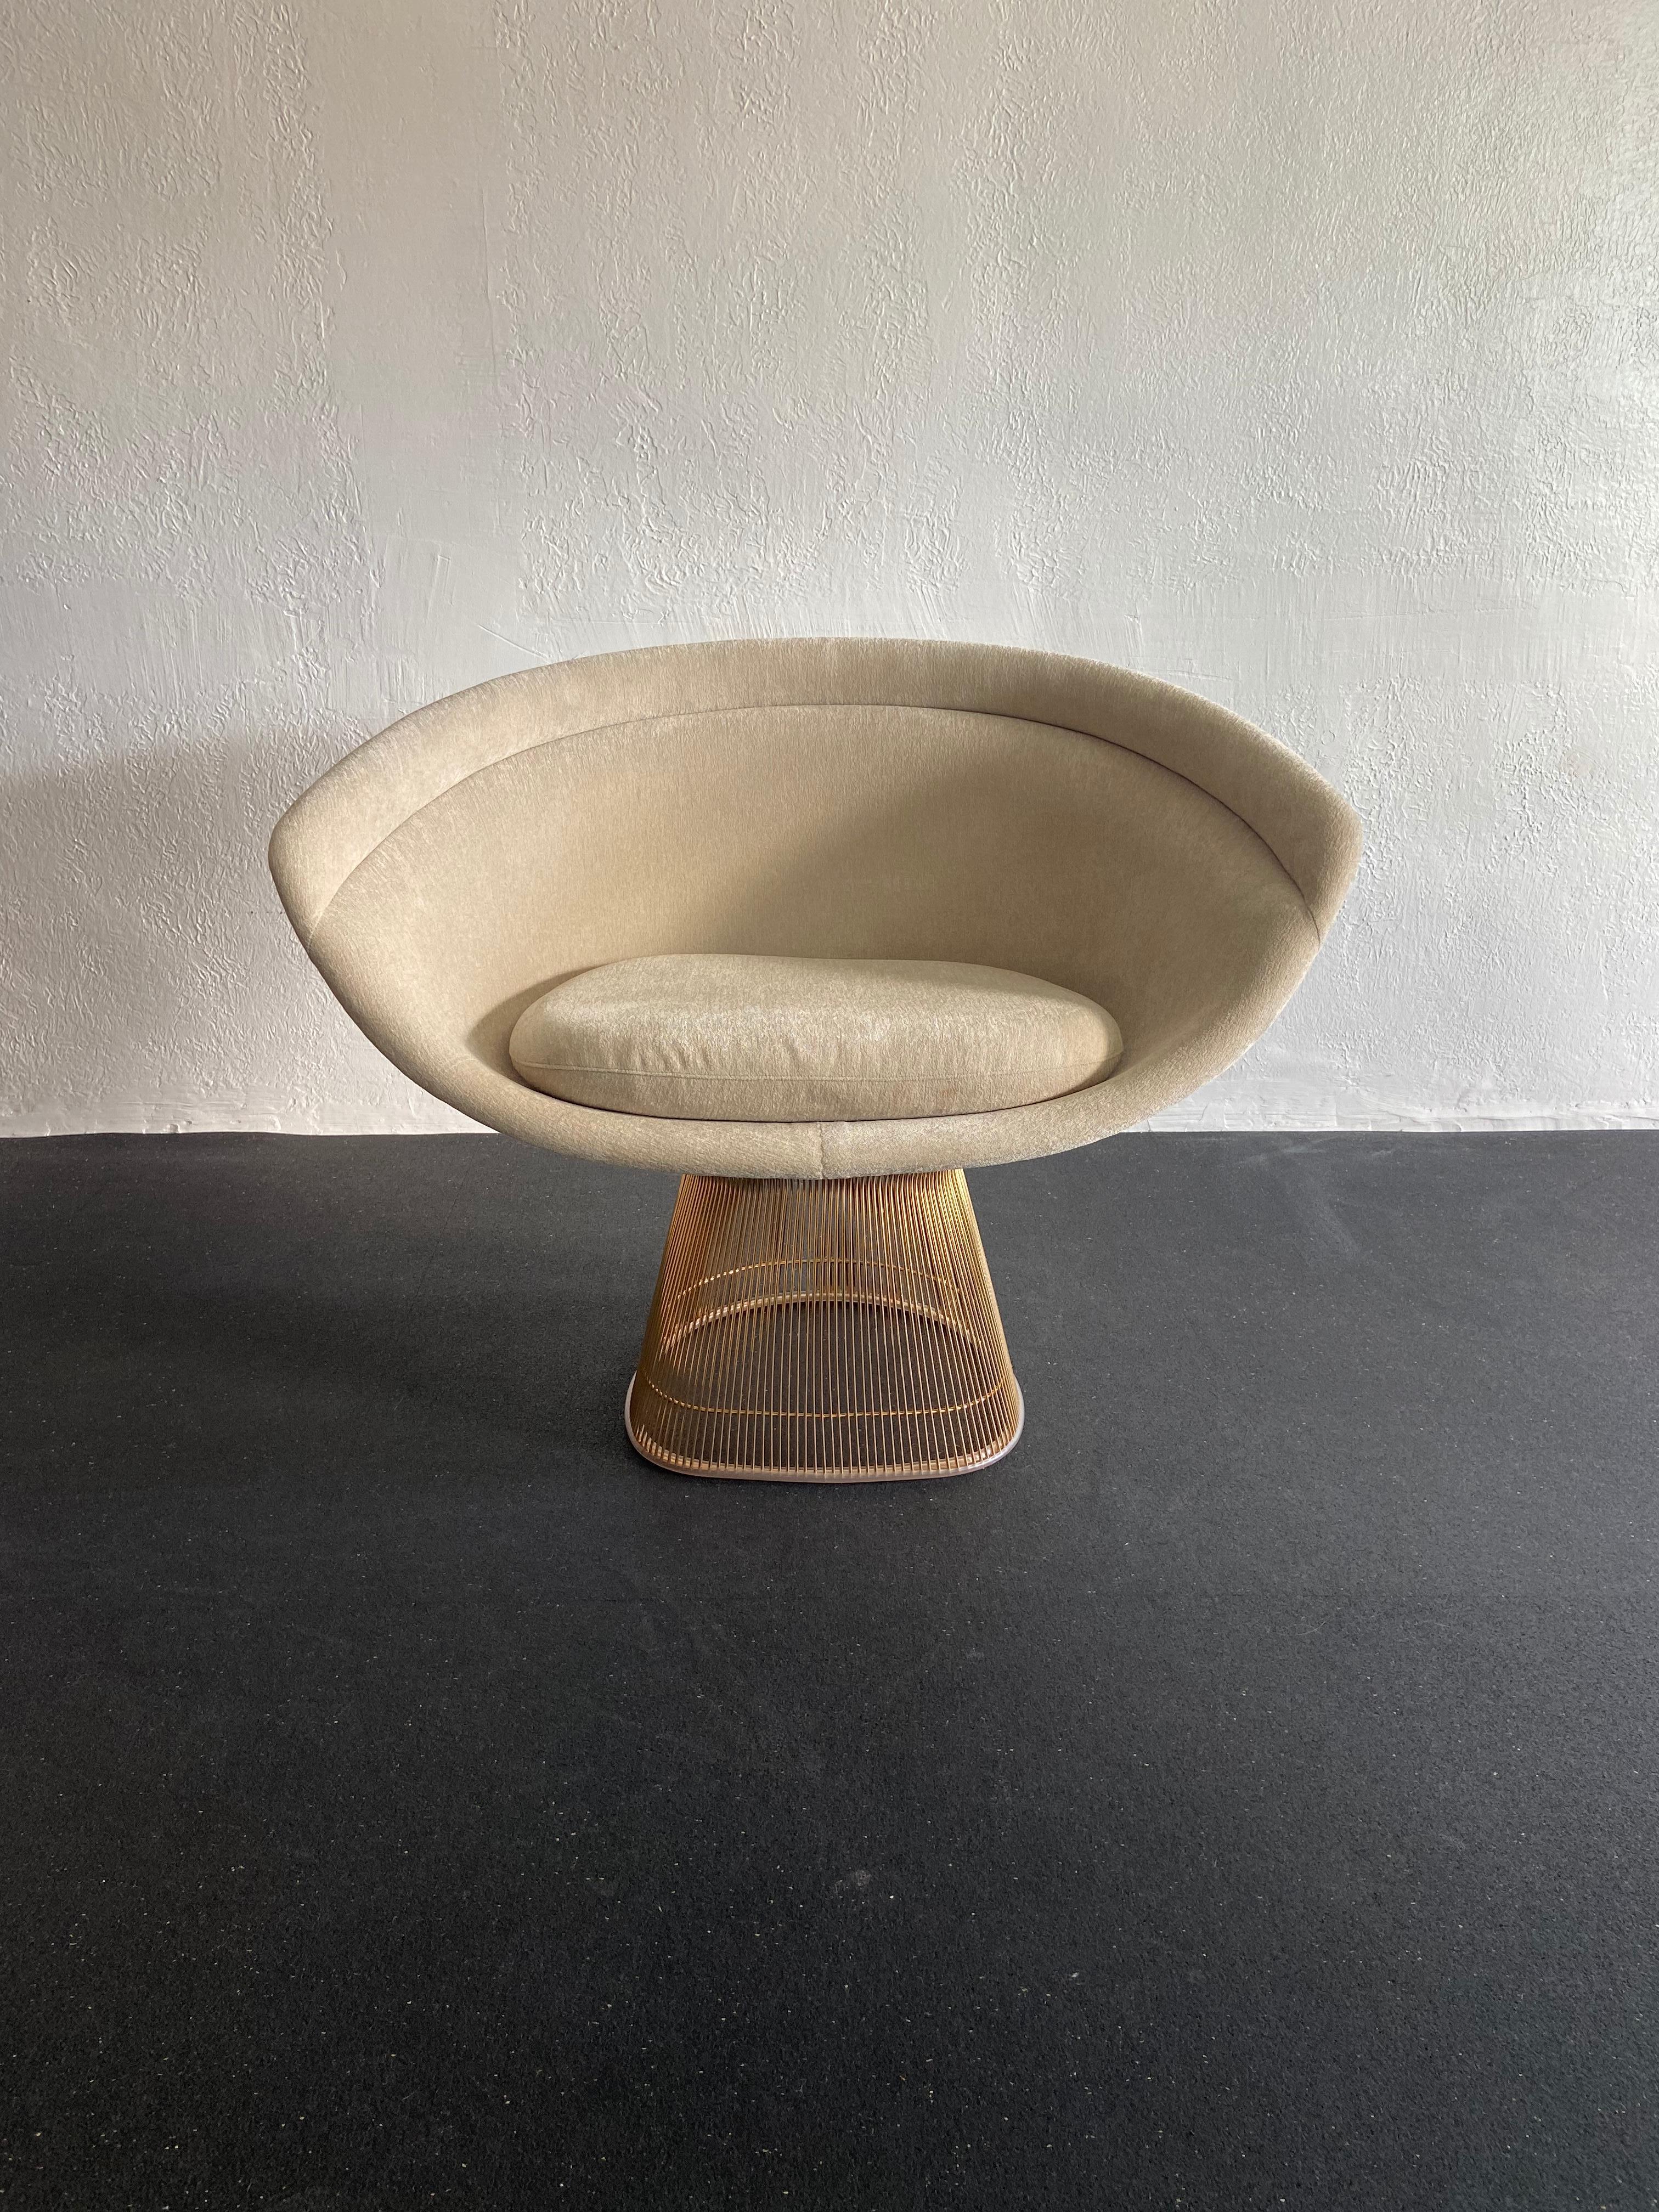 Warren Platner for Knoll gold wire lounge chair. Upholstered in chenille. Newer production. Chairs are in excellent condition with exception of some surface rust found on the wire. No attempts have been made to clean it in fear of disturbing the